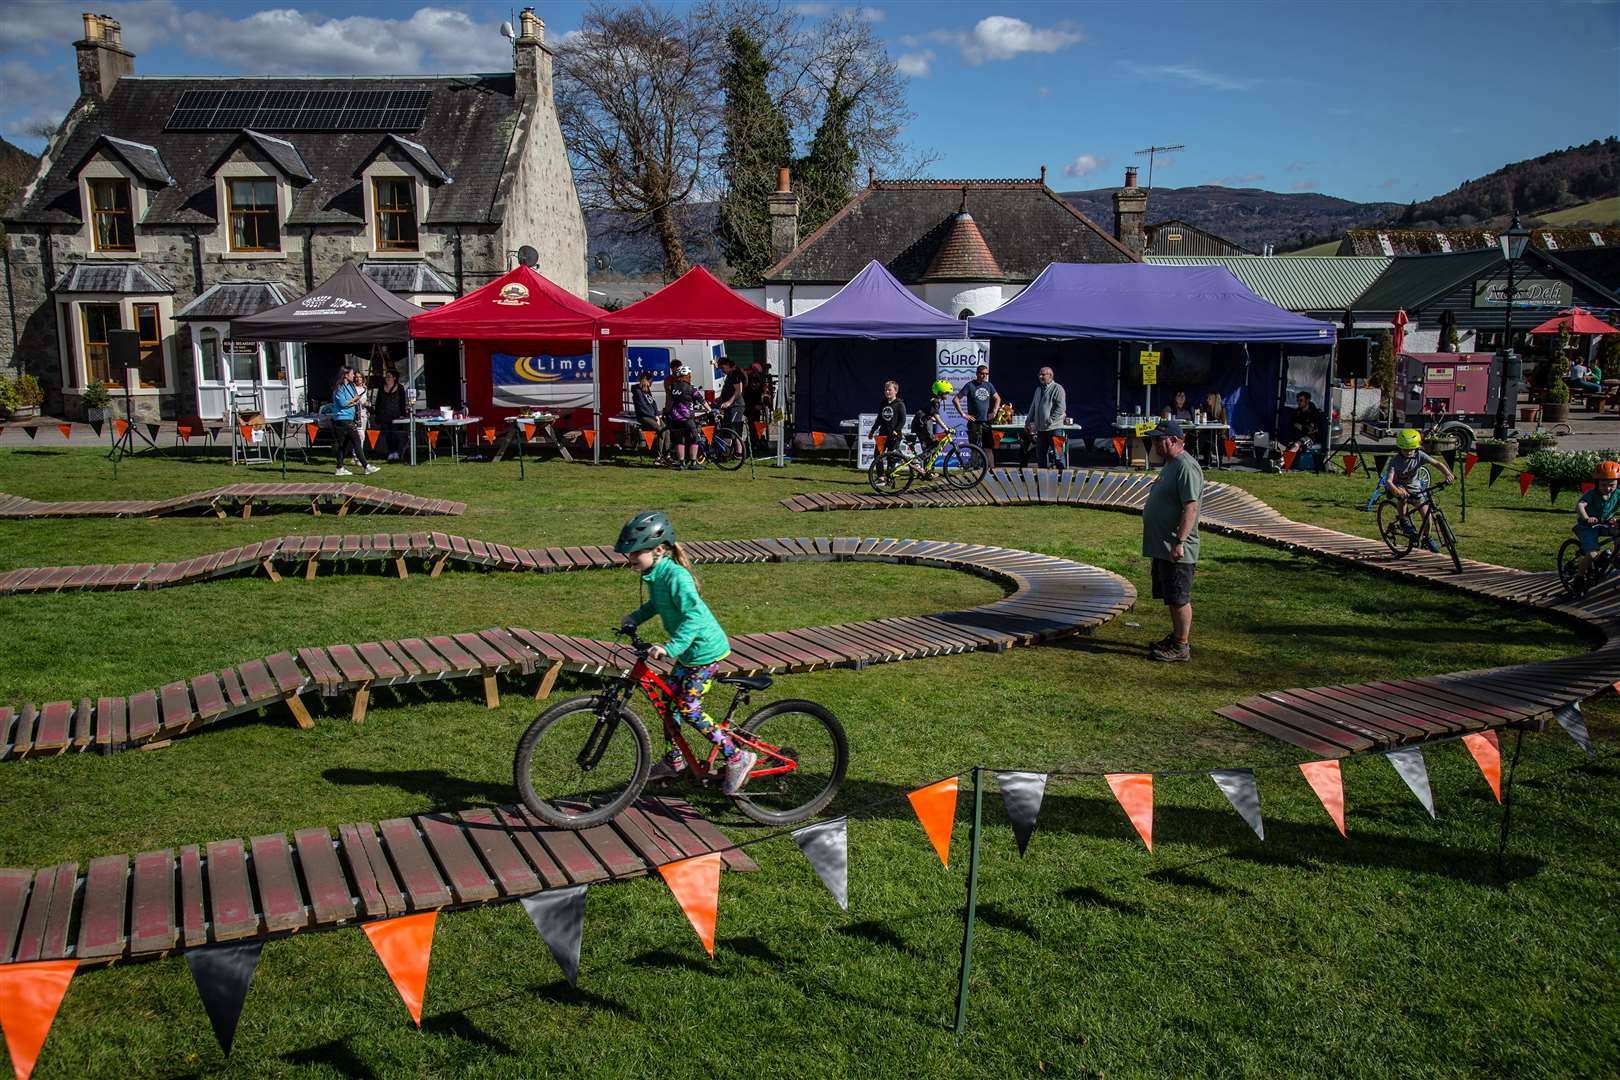 The pump track will feature at Active Ness. Picture: Craig Dutton/VILN